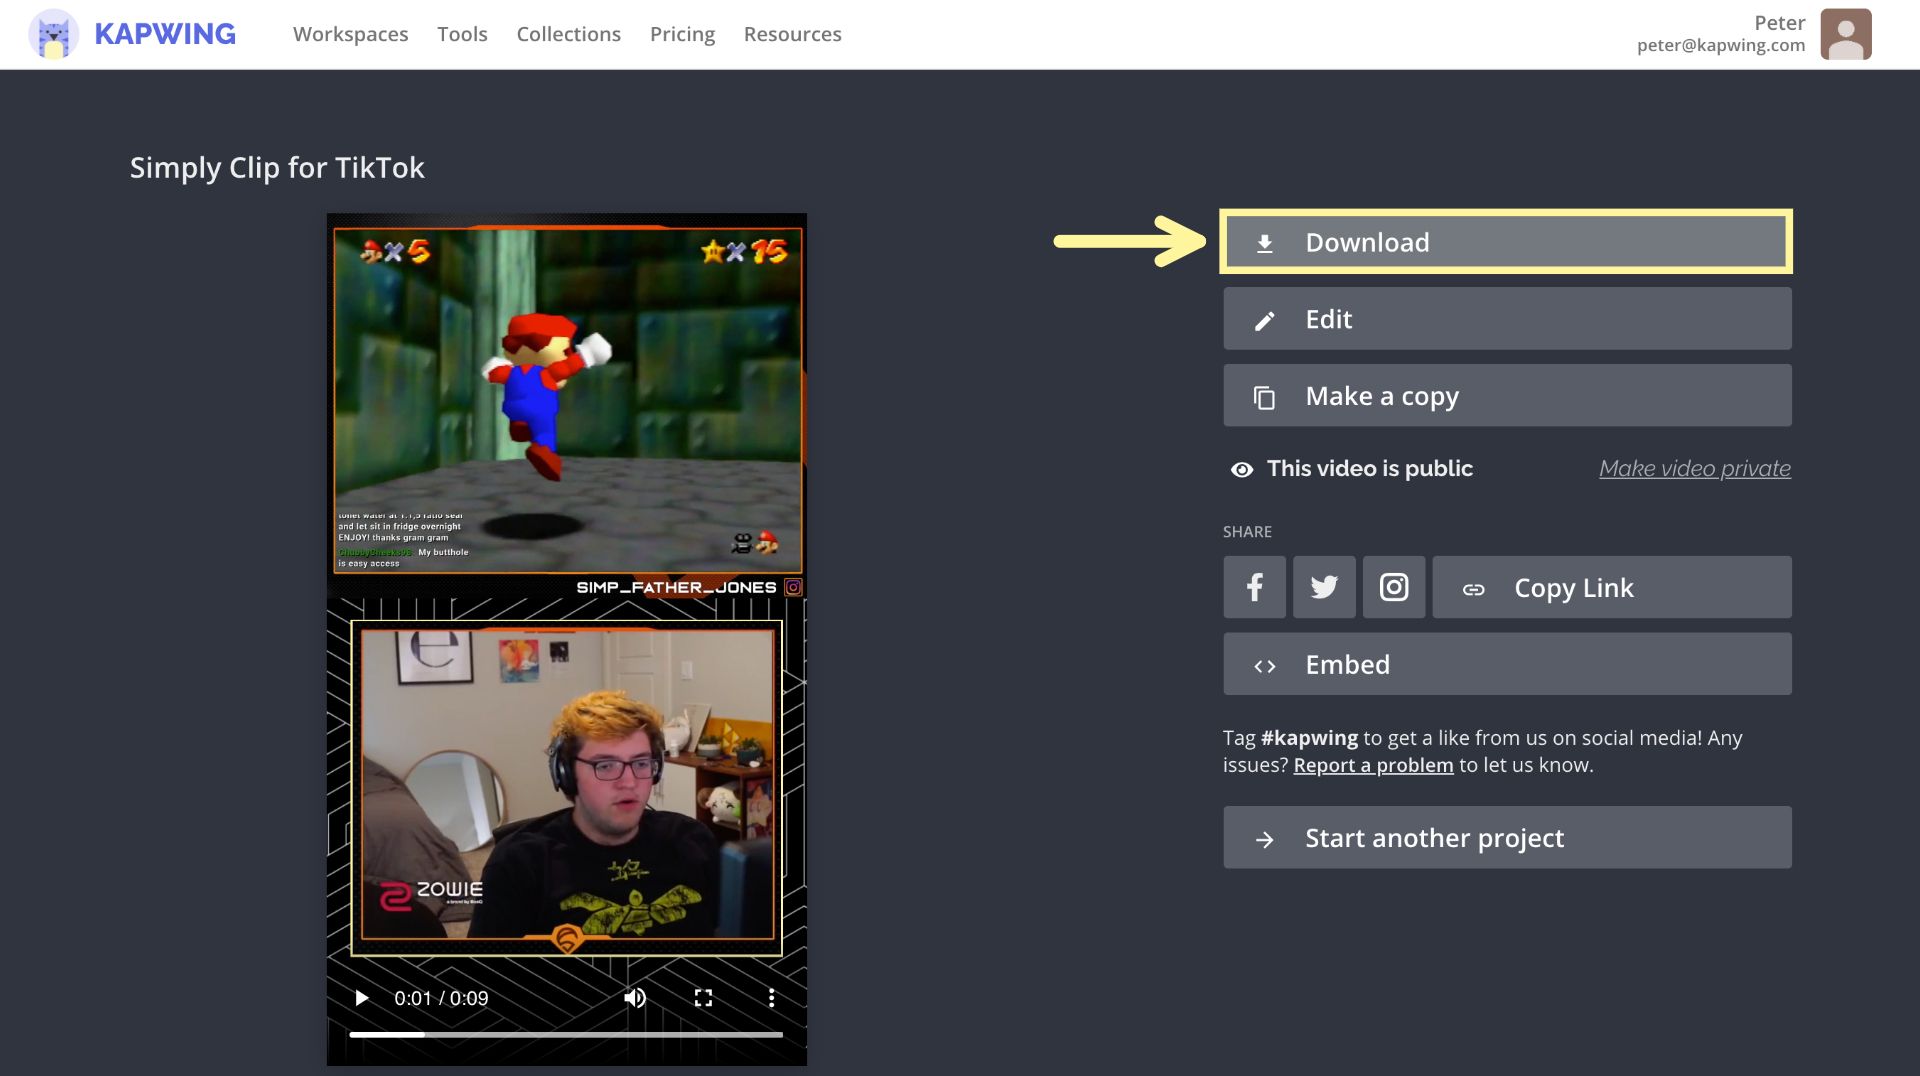 A screenshot demonstrating how to download a video from the final video page in Kapwing. 